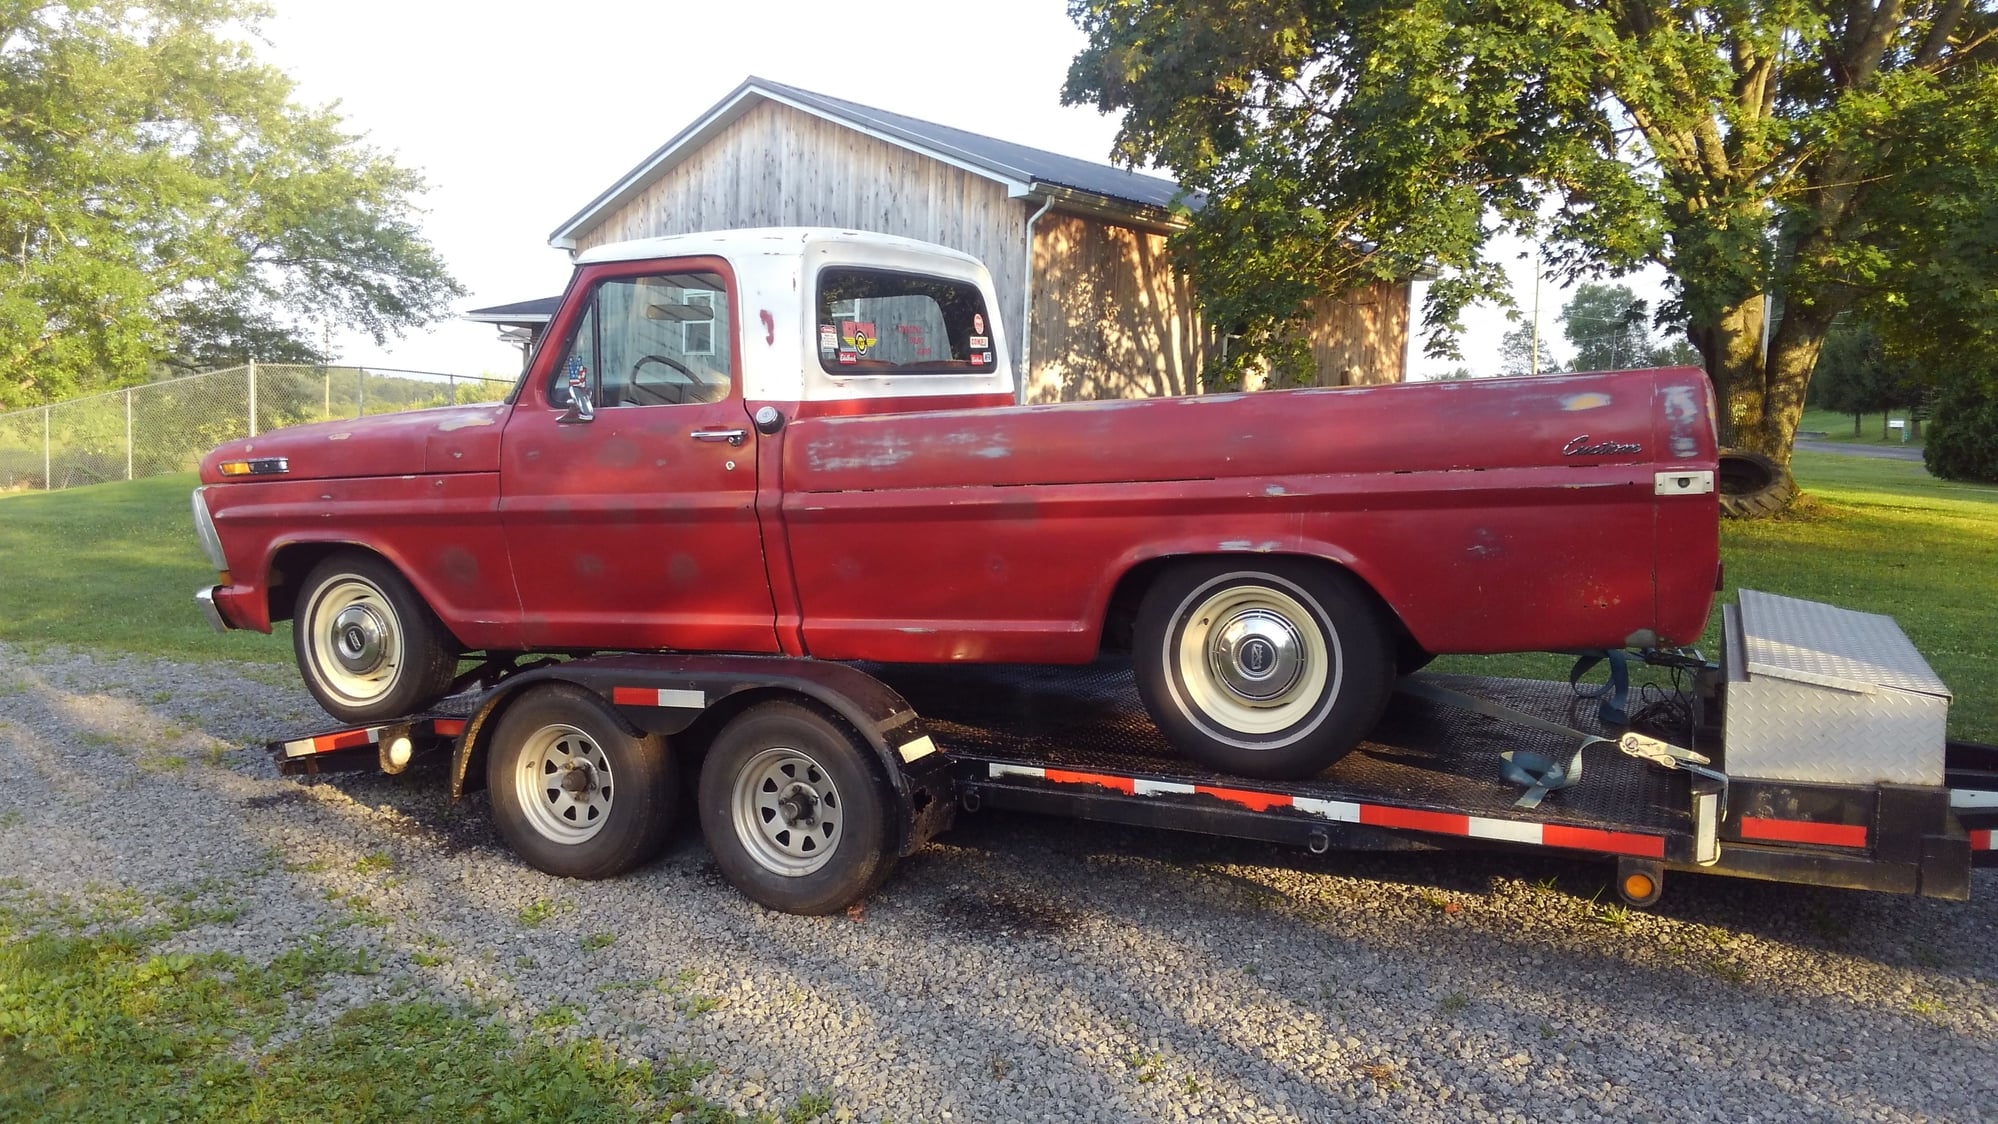 1971 Ford F-100 - LS 6.0L, ,4L60E 1971 Ford f100 - Used - VIN Abc12377777f - 76,000 Miles - 8 cyl - 2WD - Automatic - Truck - Red - Slippery Rock, PA 16057, United States